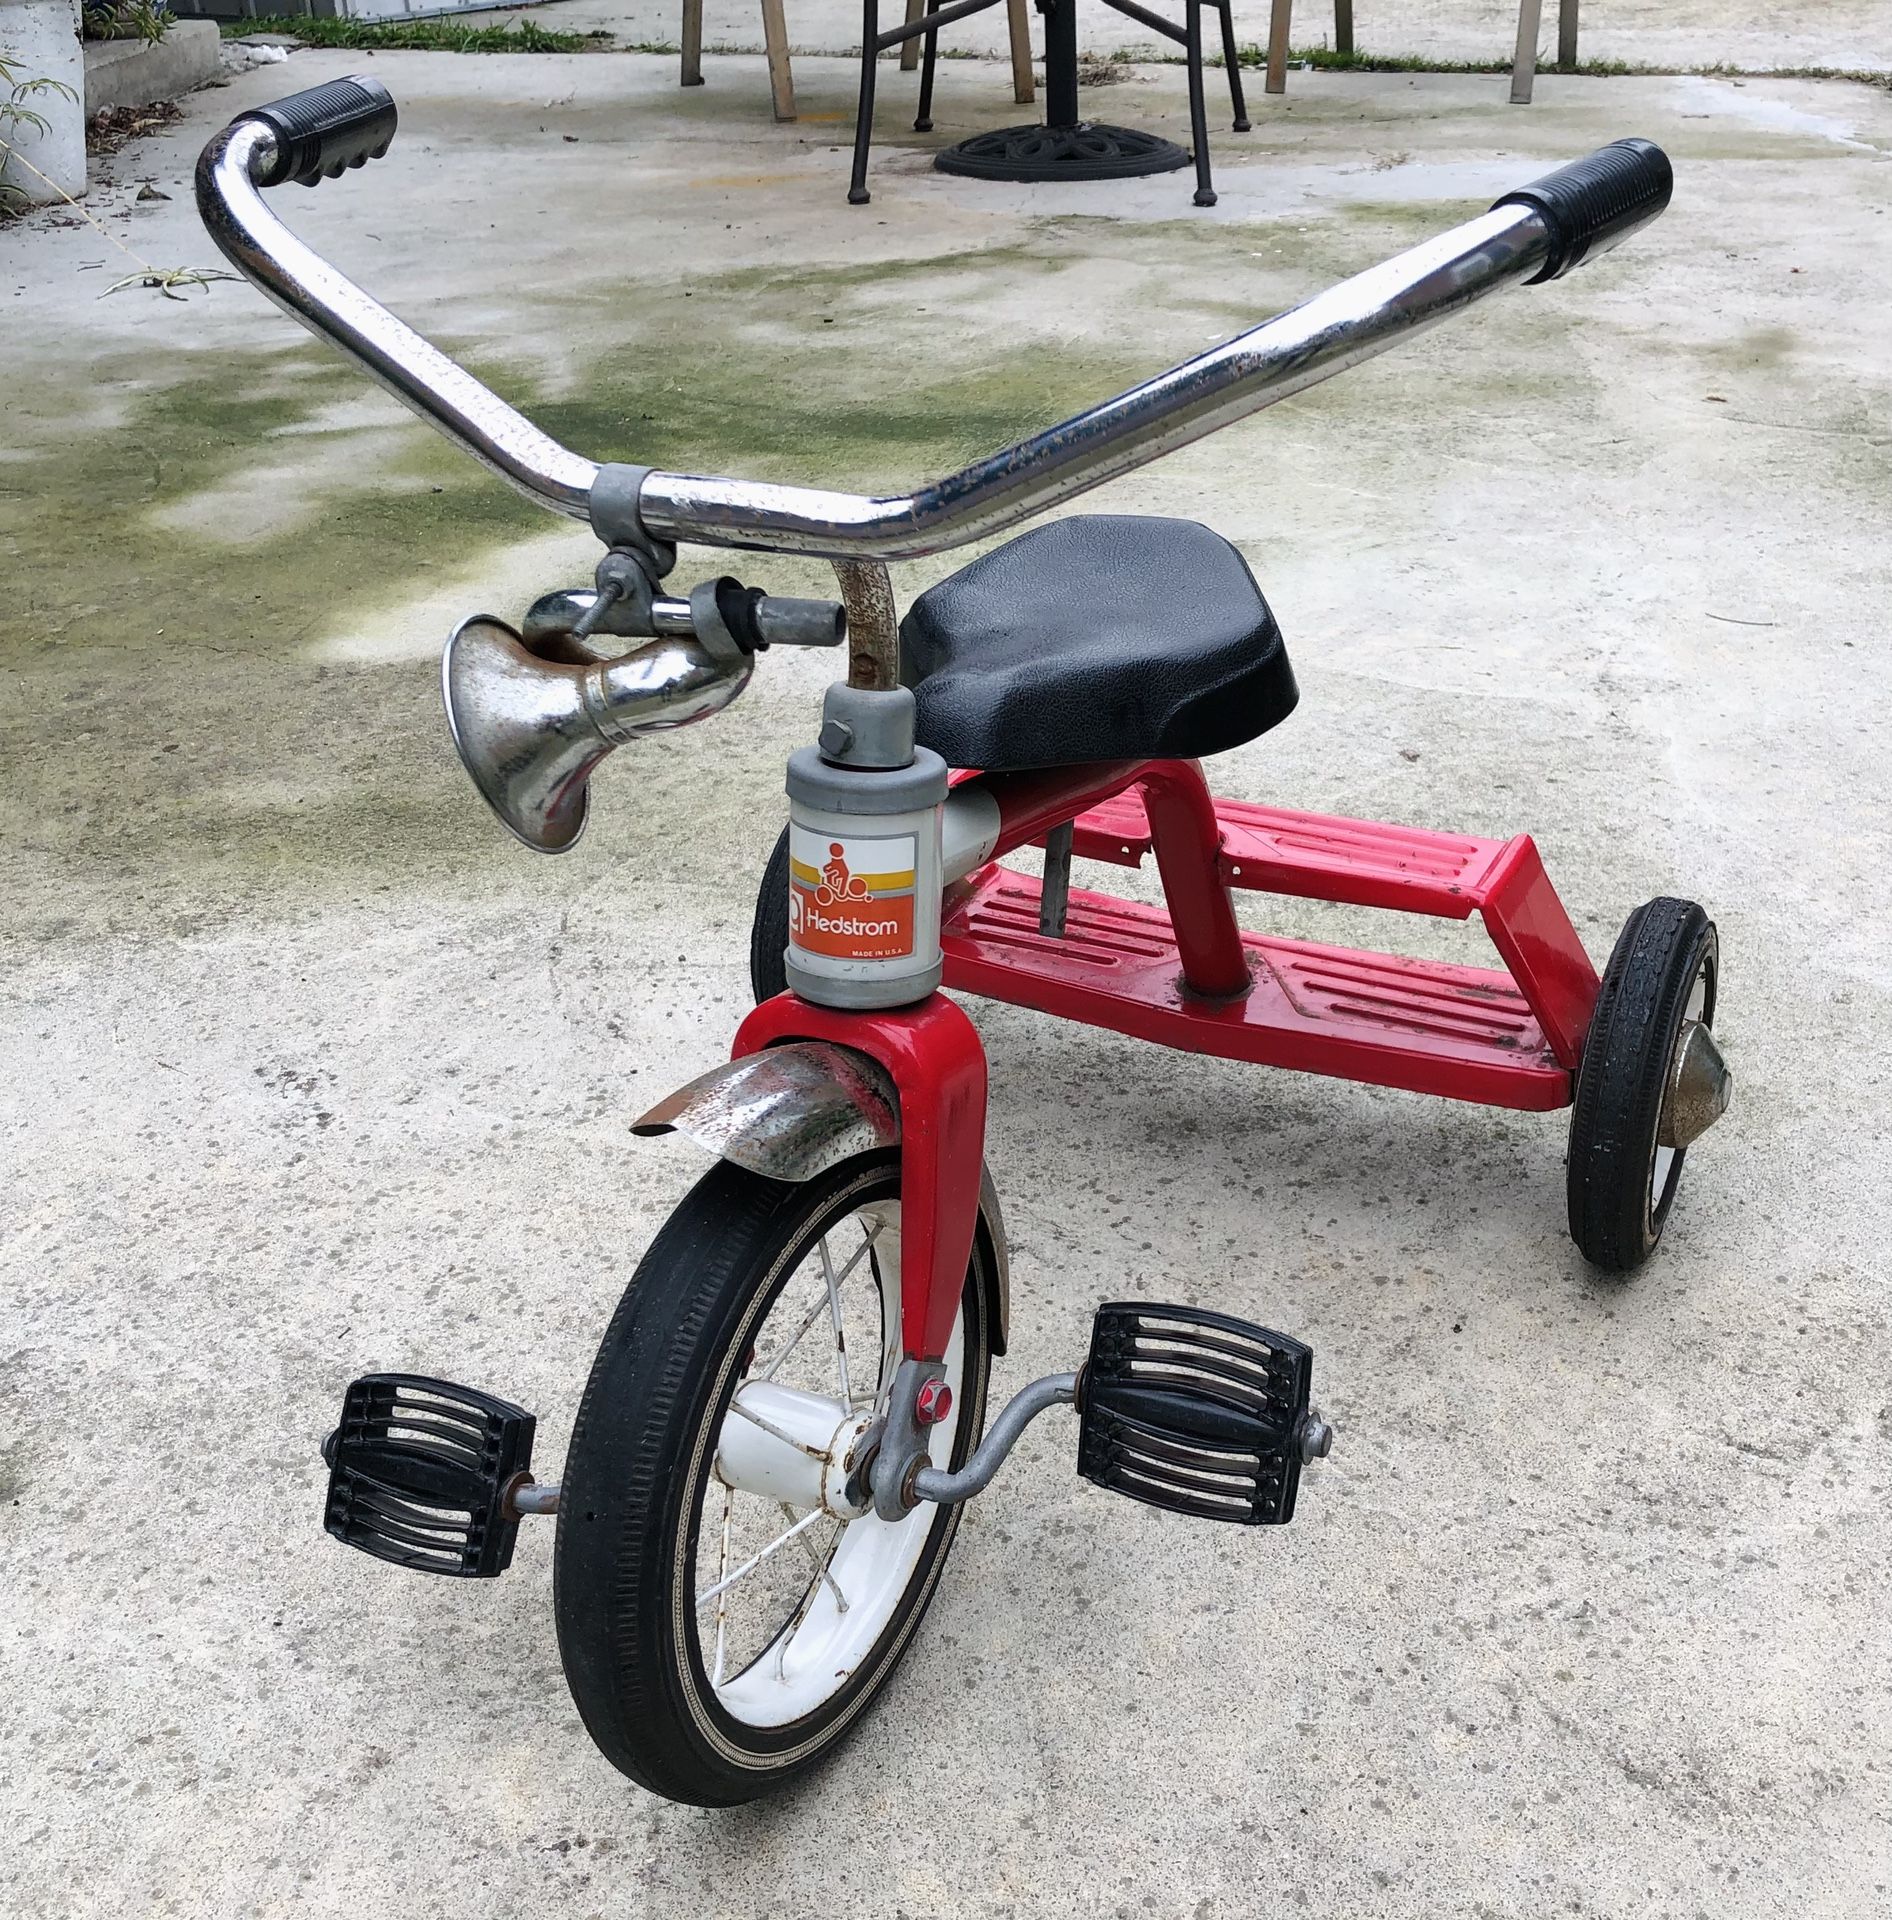 Vintage 1979 Hedstrom Toddler Tricycle USA Red Black & Chrome Classic Kids  Radio Flyer Retro for Sale in San Leandro, CA - OfferUp